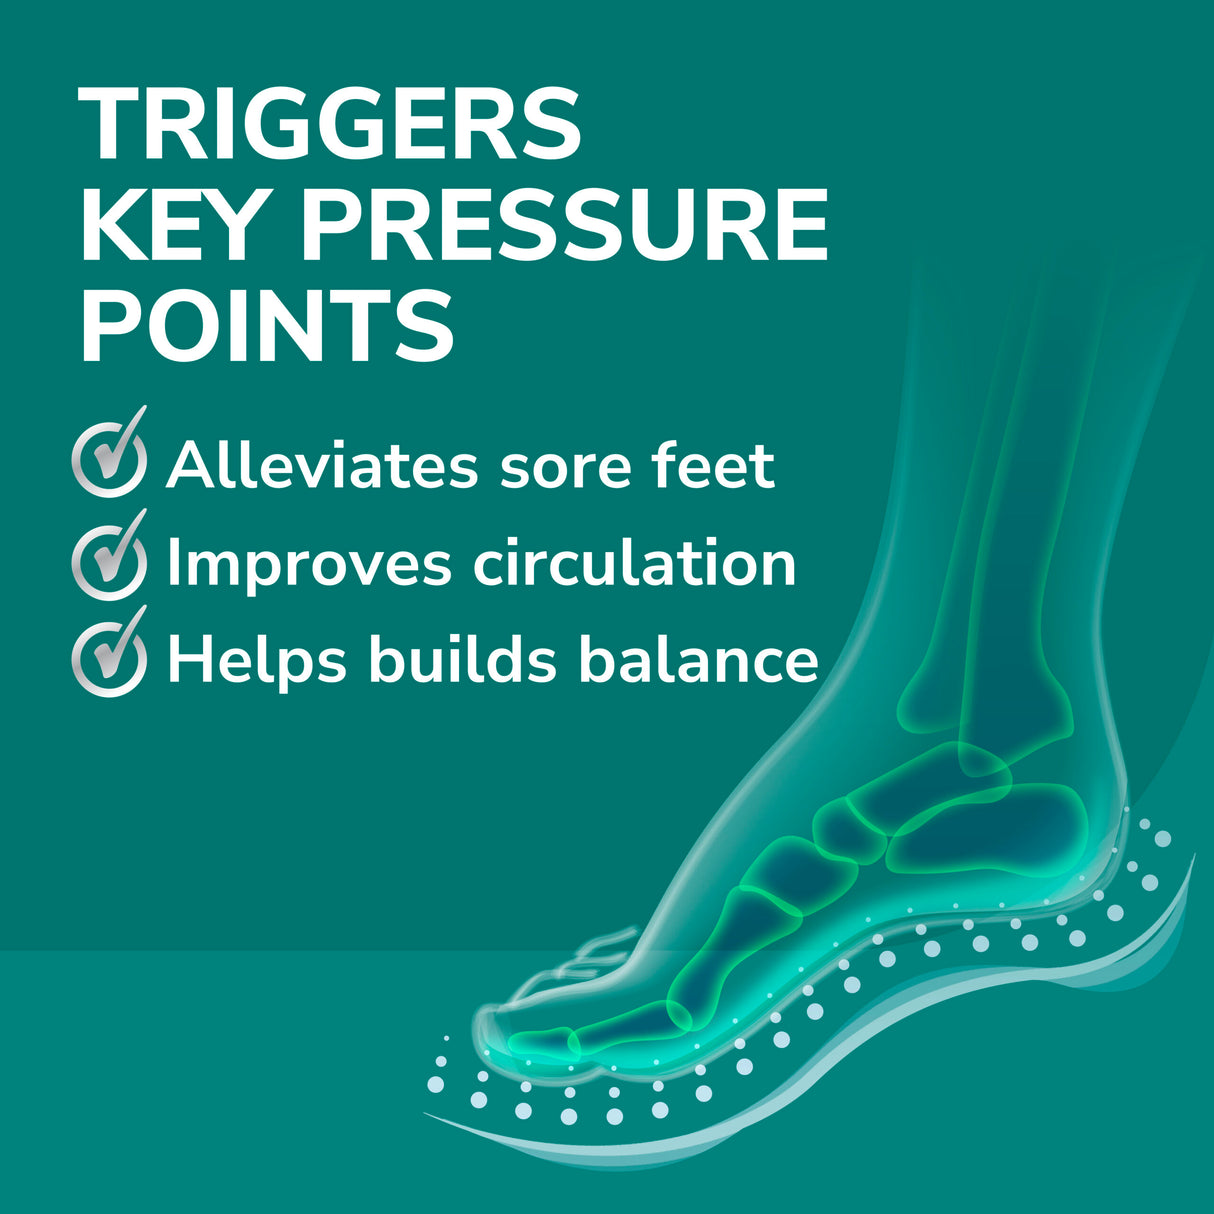 image of triggers key pressure points alleviates sore feet improves circulation and helps build balance